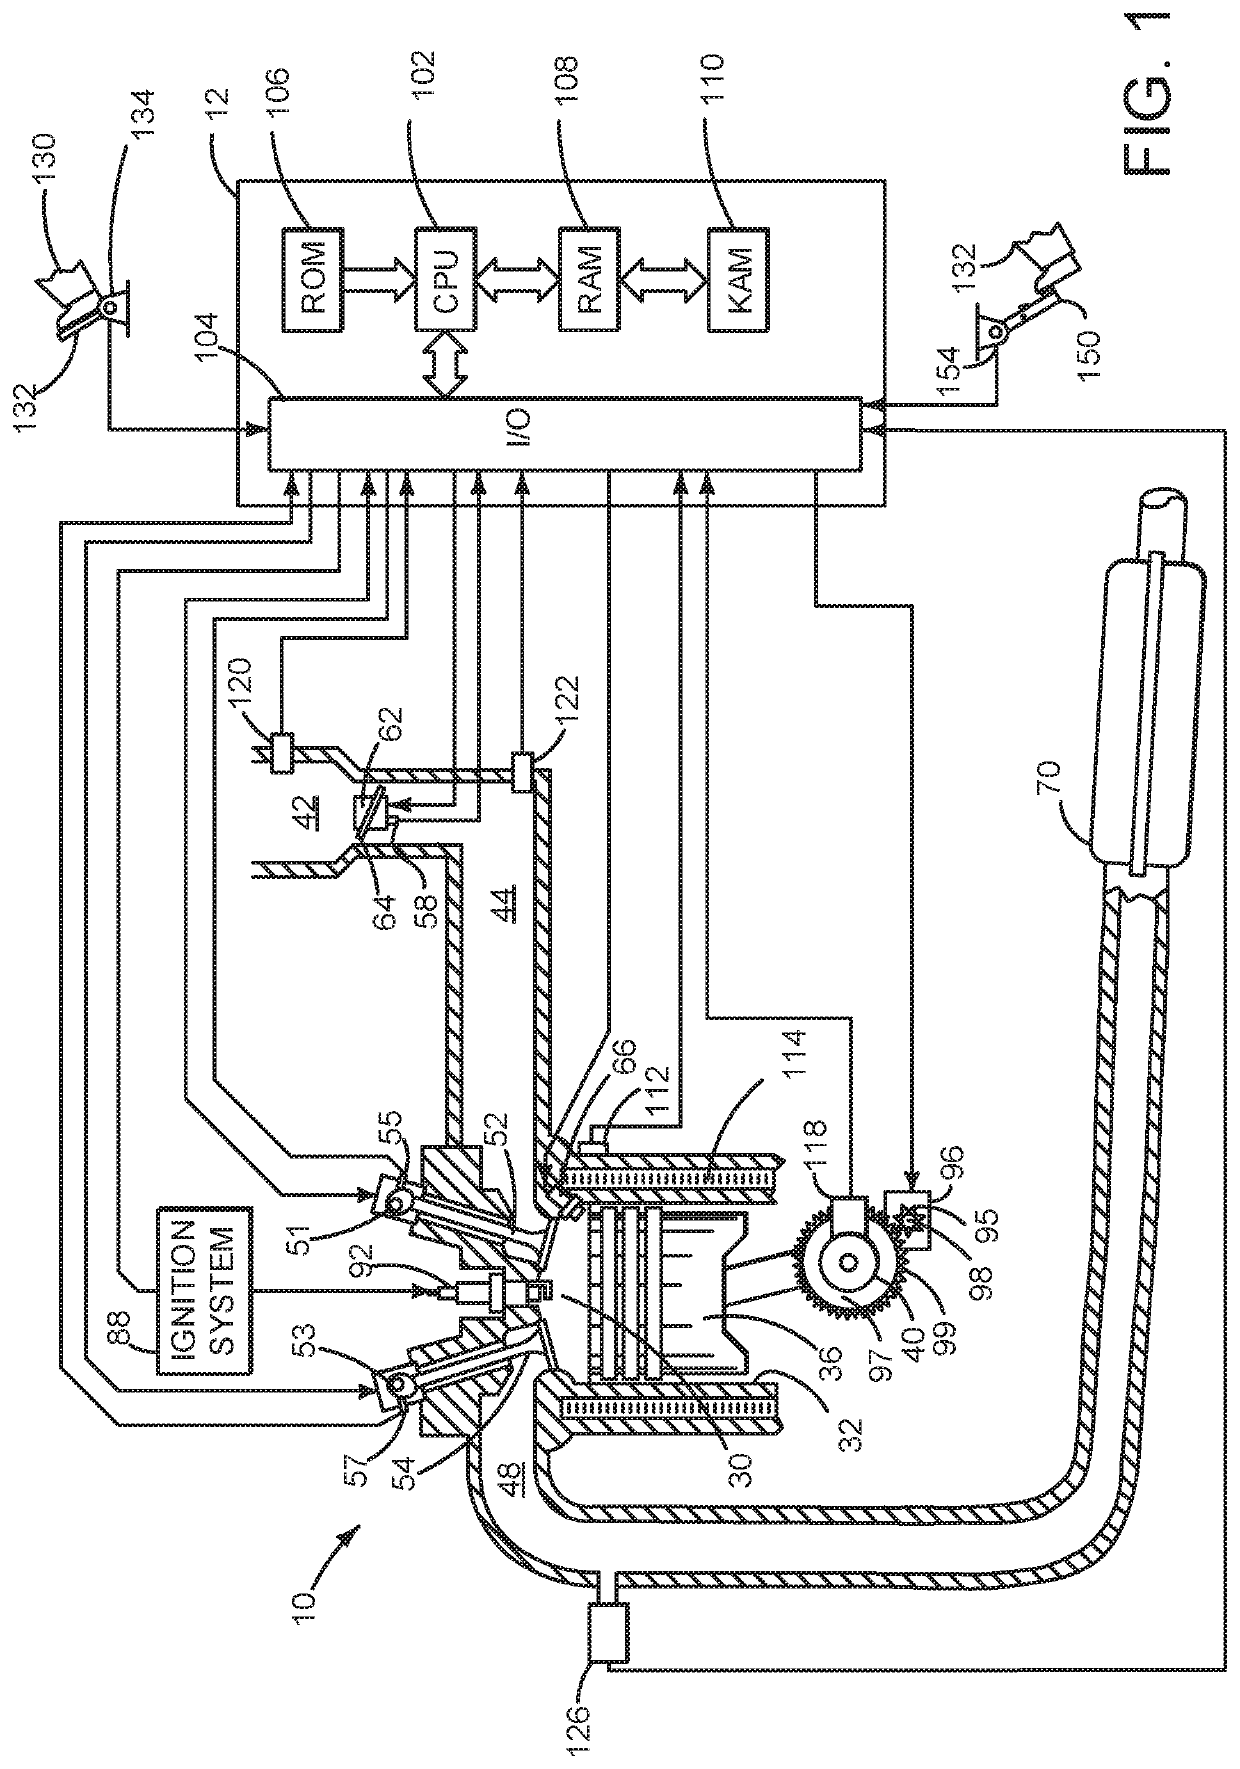 Methods and systems for controlling a stop/start engine